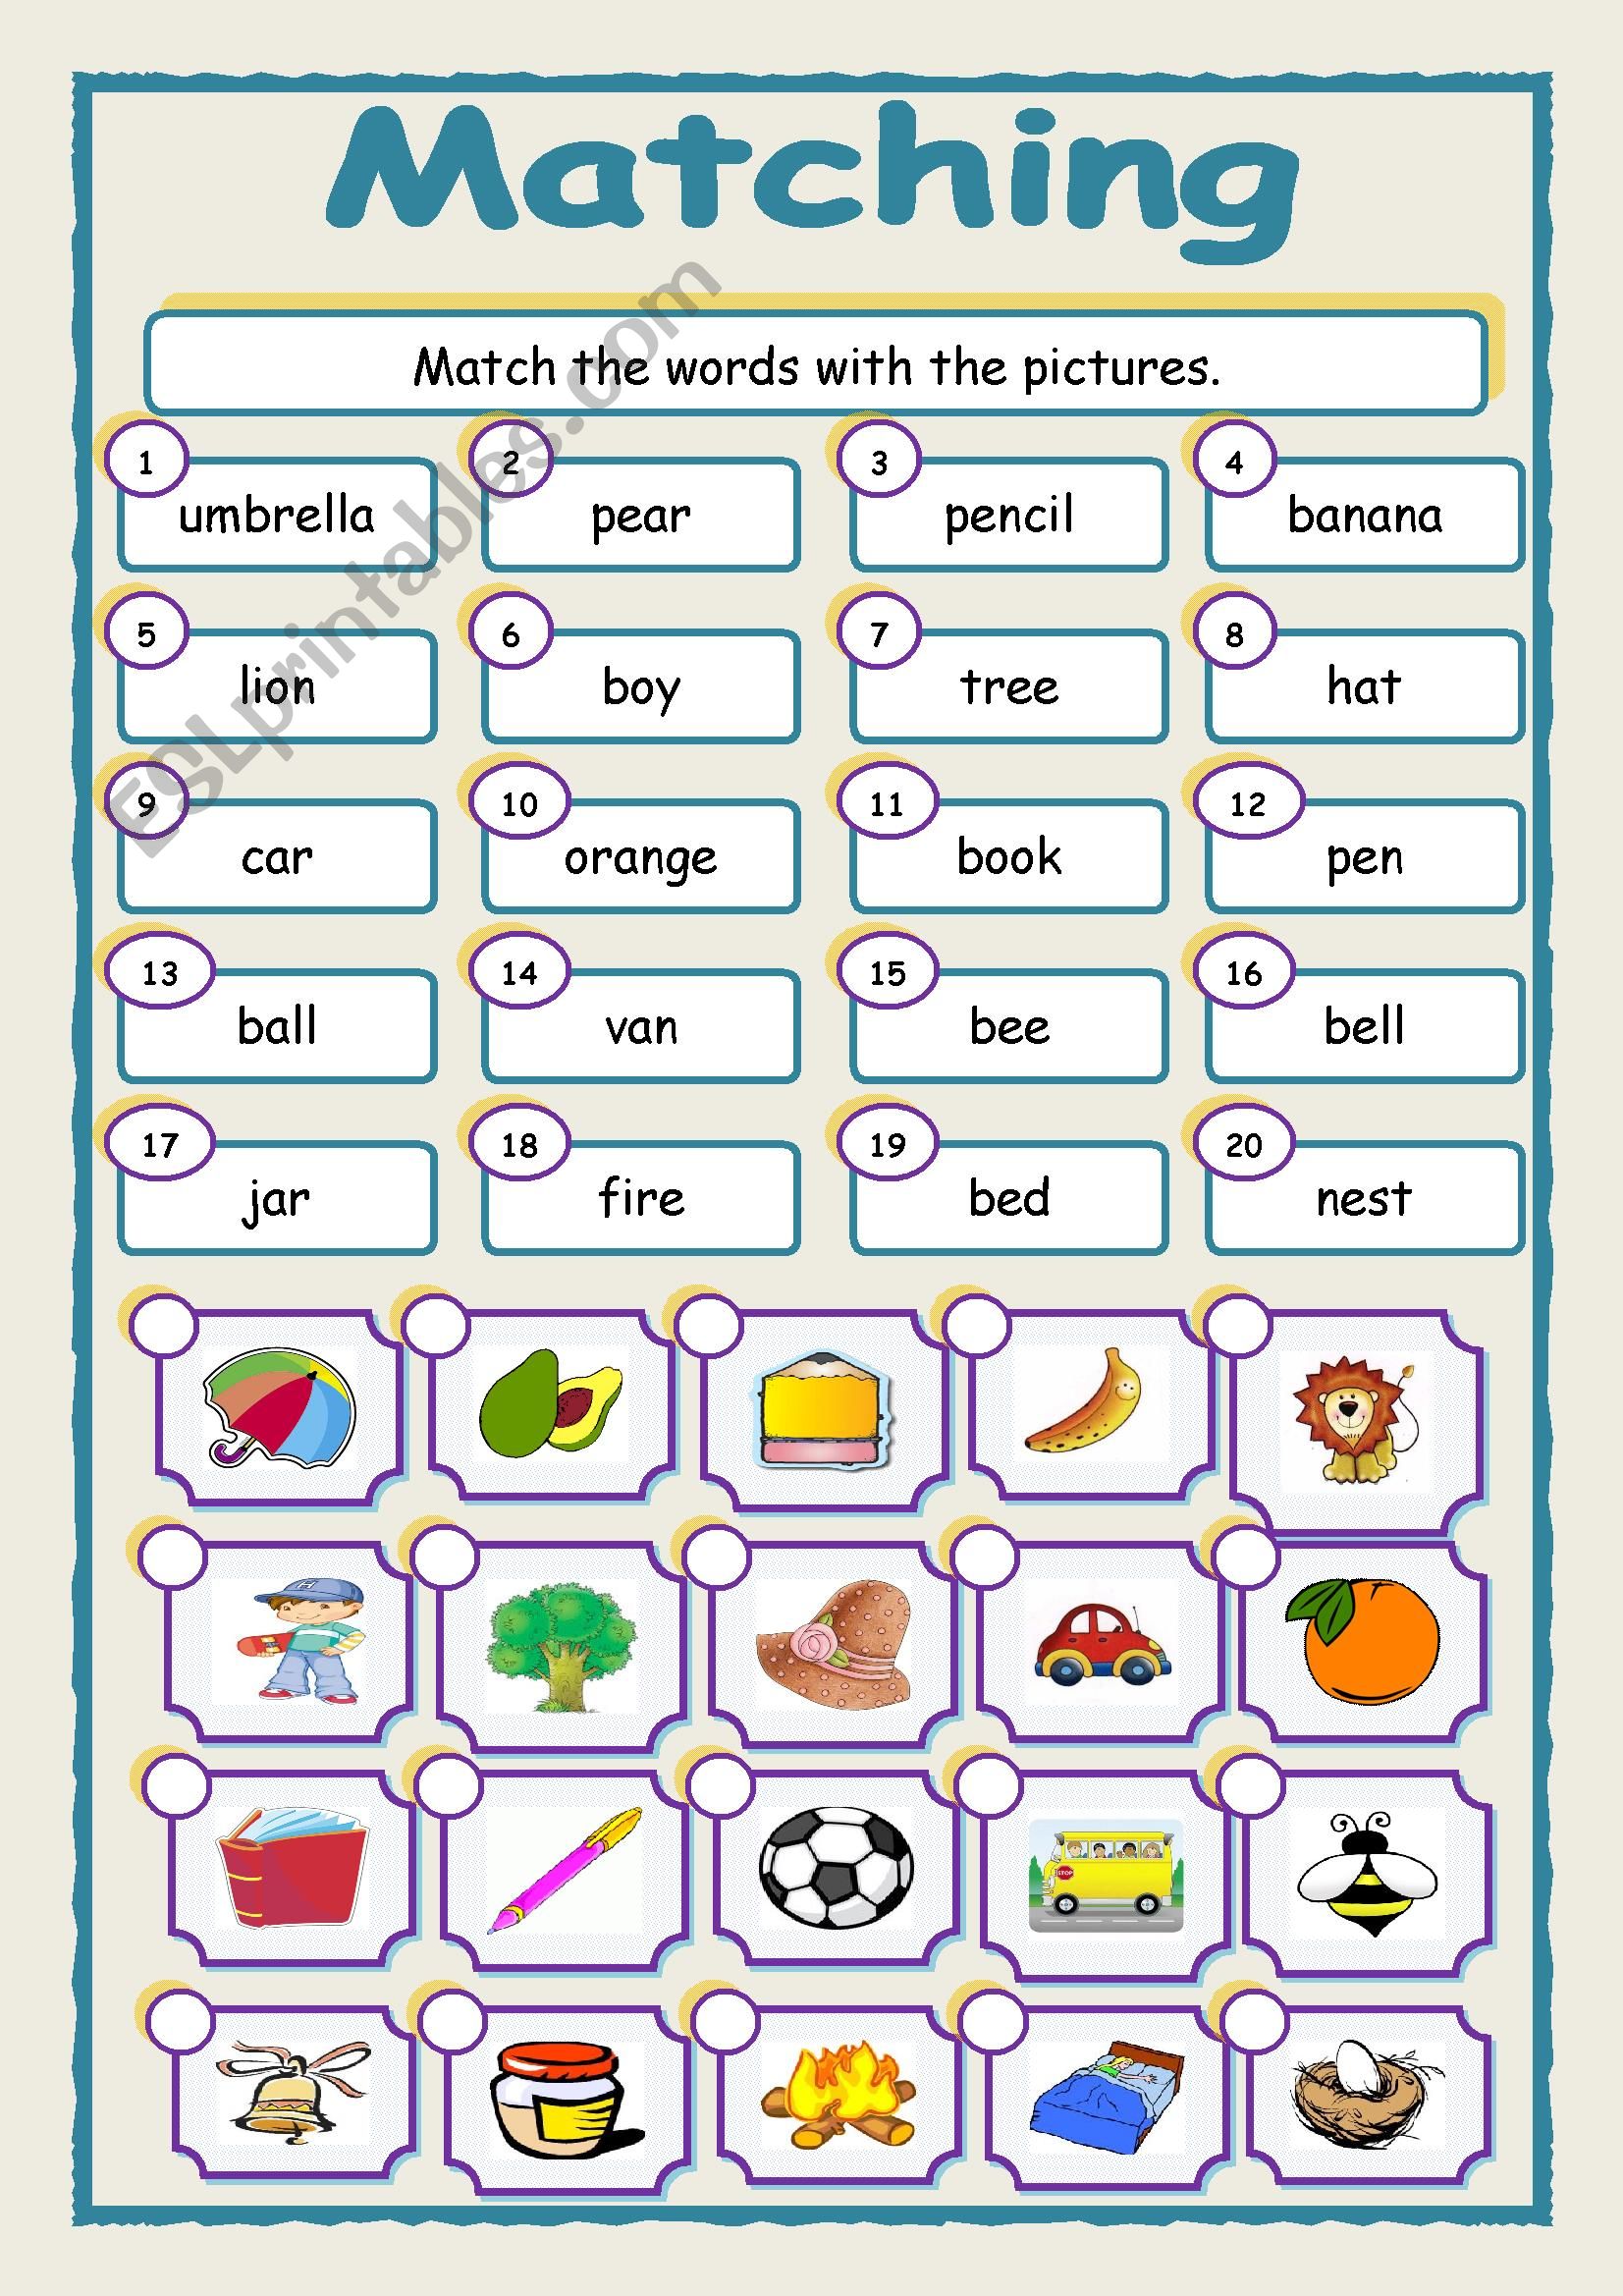 vocabulary-matching-with-pictures-esl-worksheet-by-jhansi